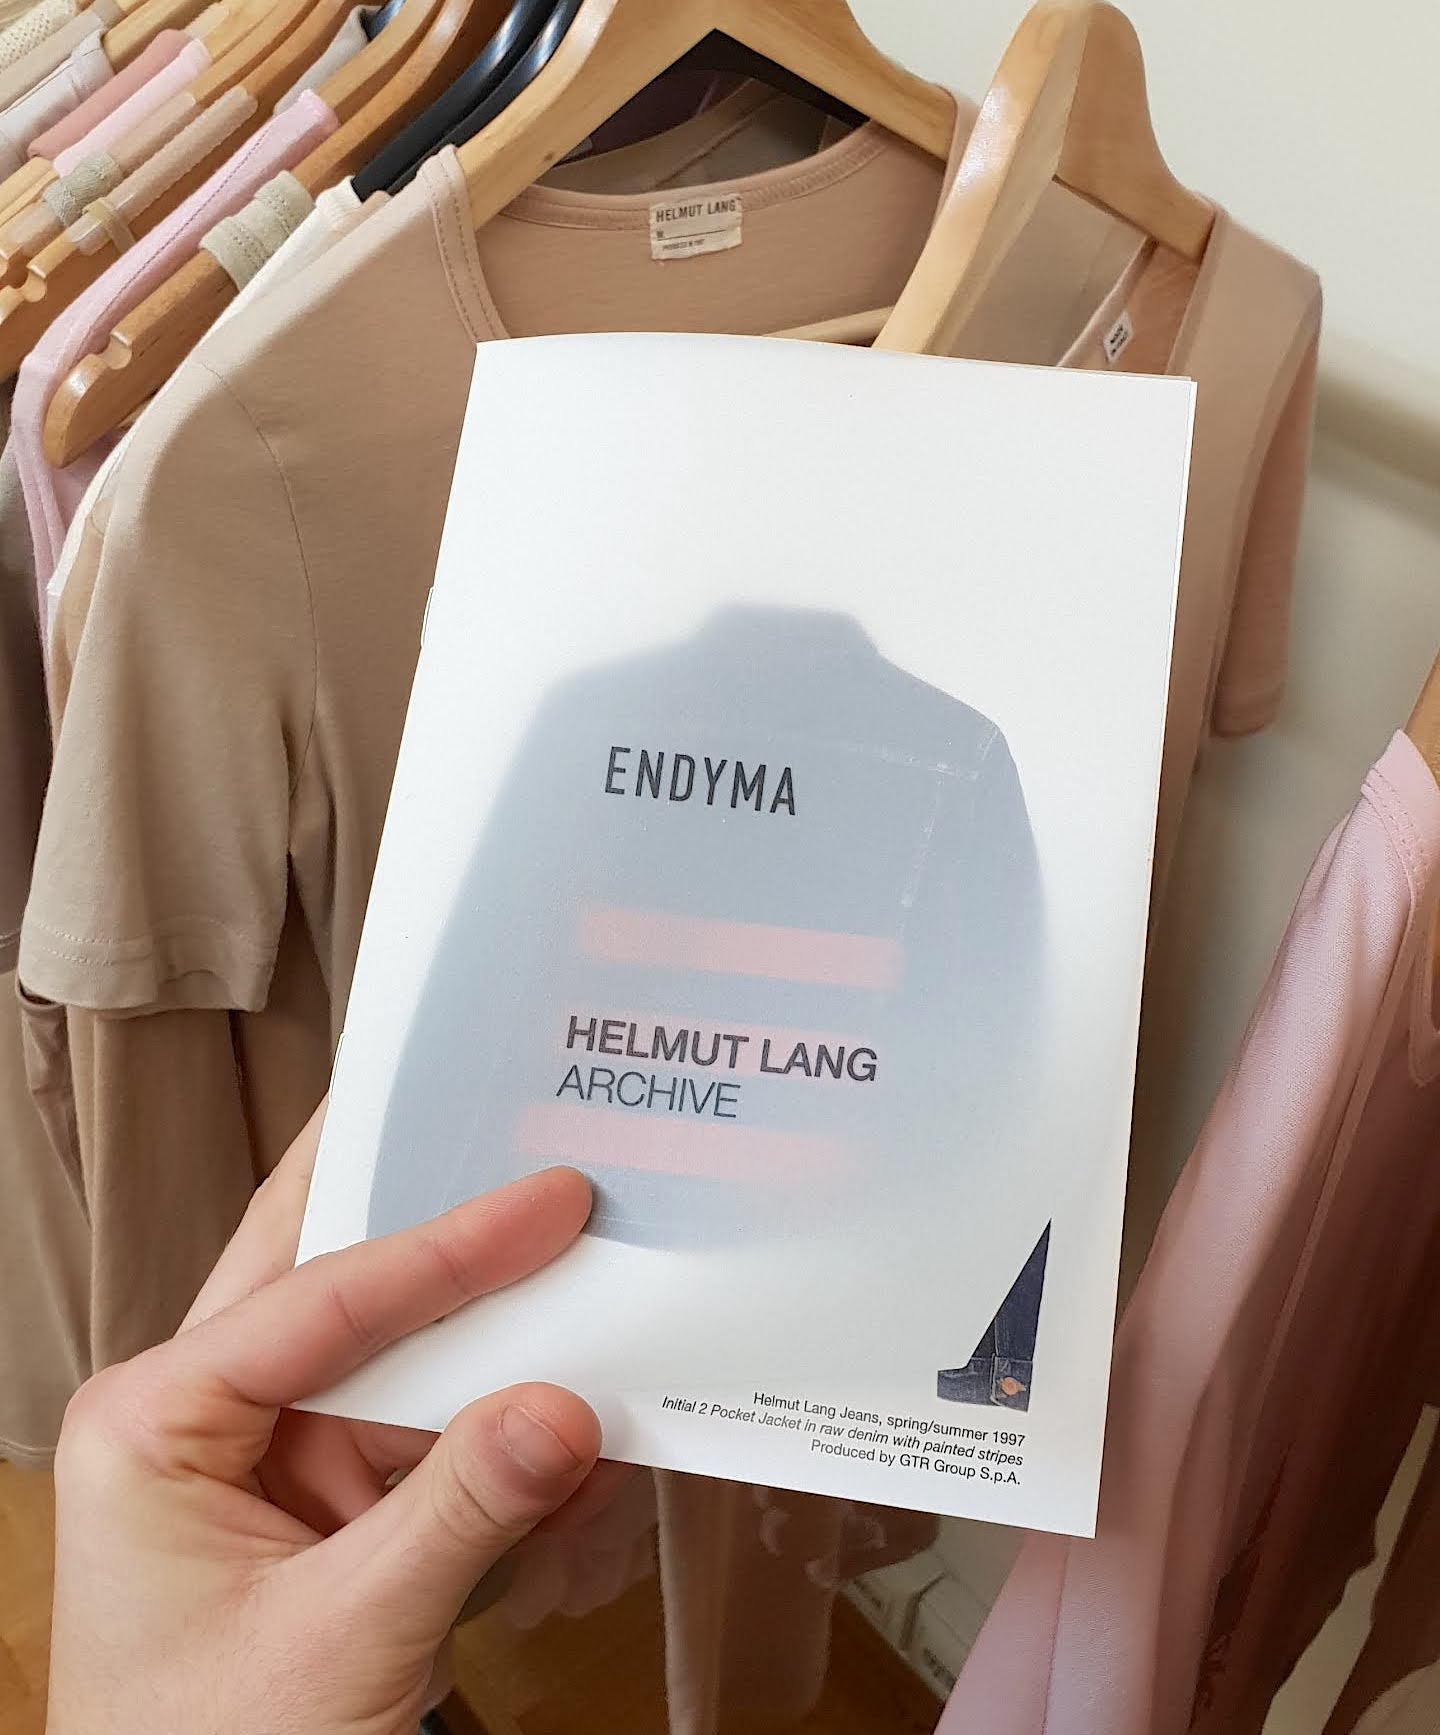 A New Helmut Lang Archives Book Comes to New York With a Traveling